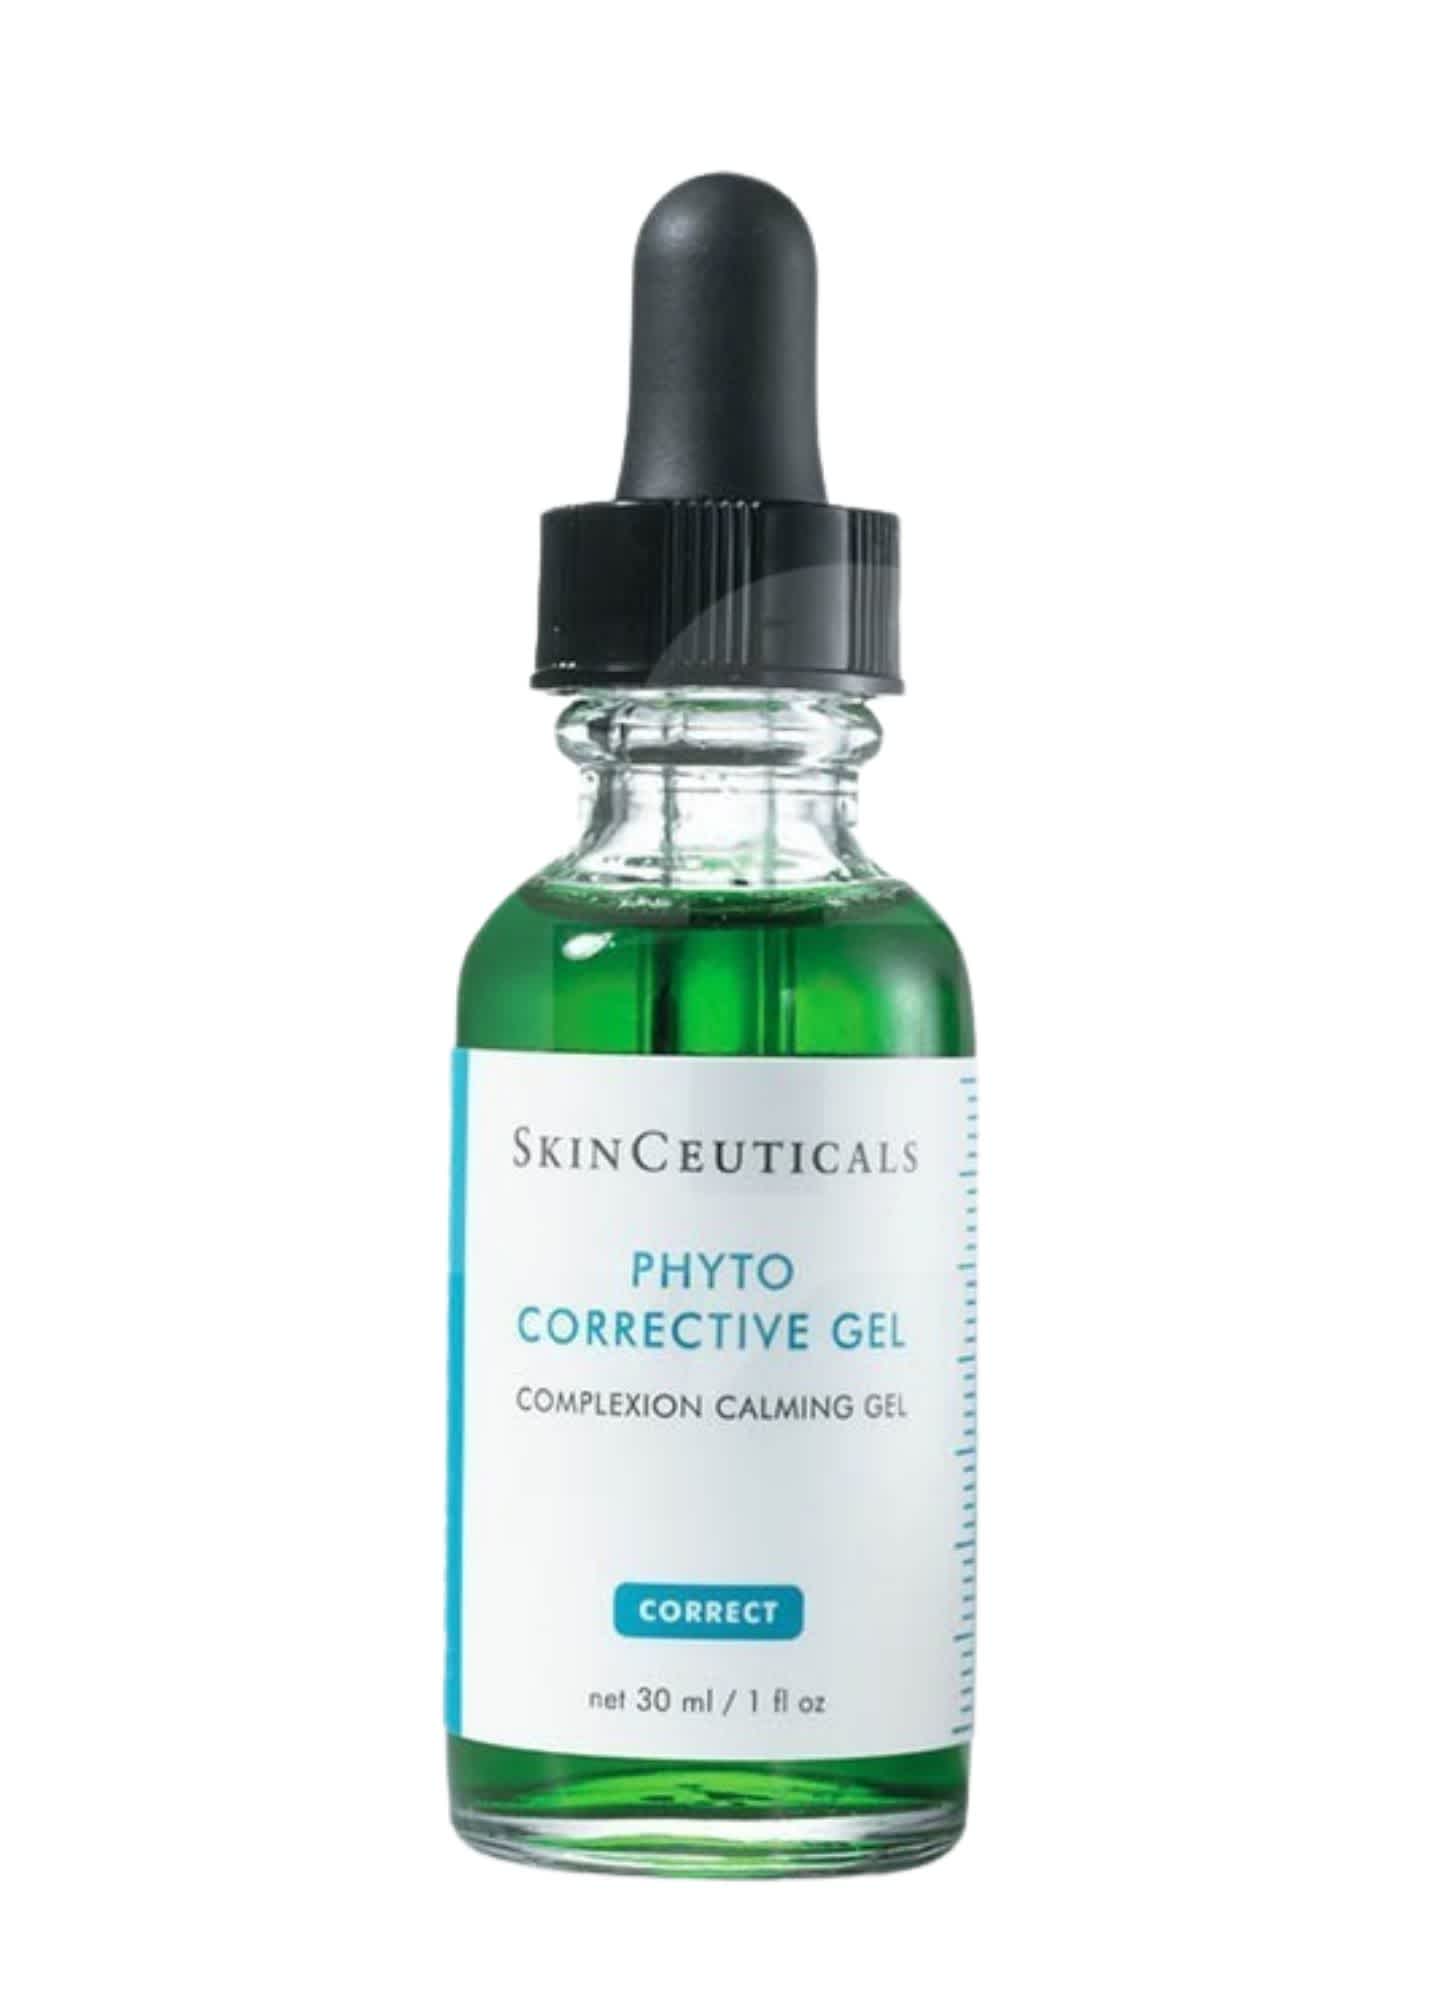 Skinceuticals, Phyto Corrective Gel ($105) Currently on 20% Discount at Adore Beauty 